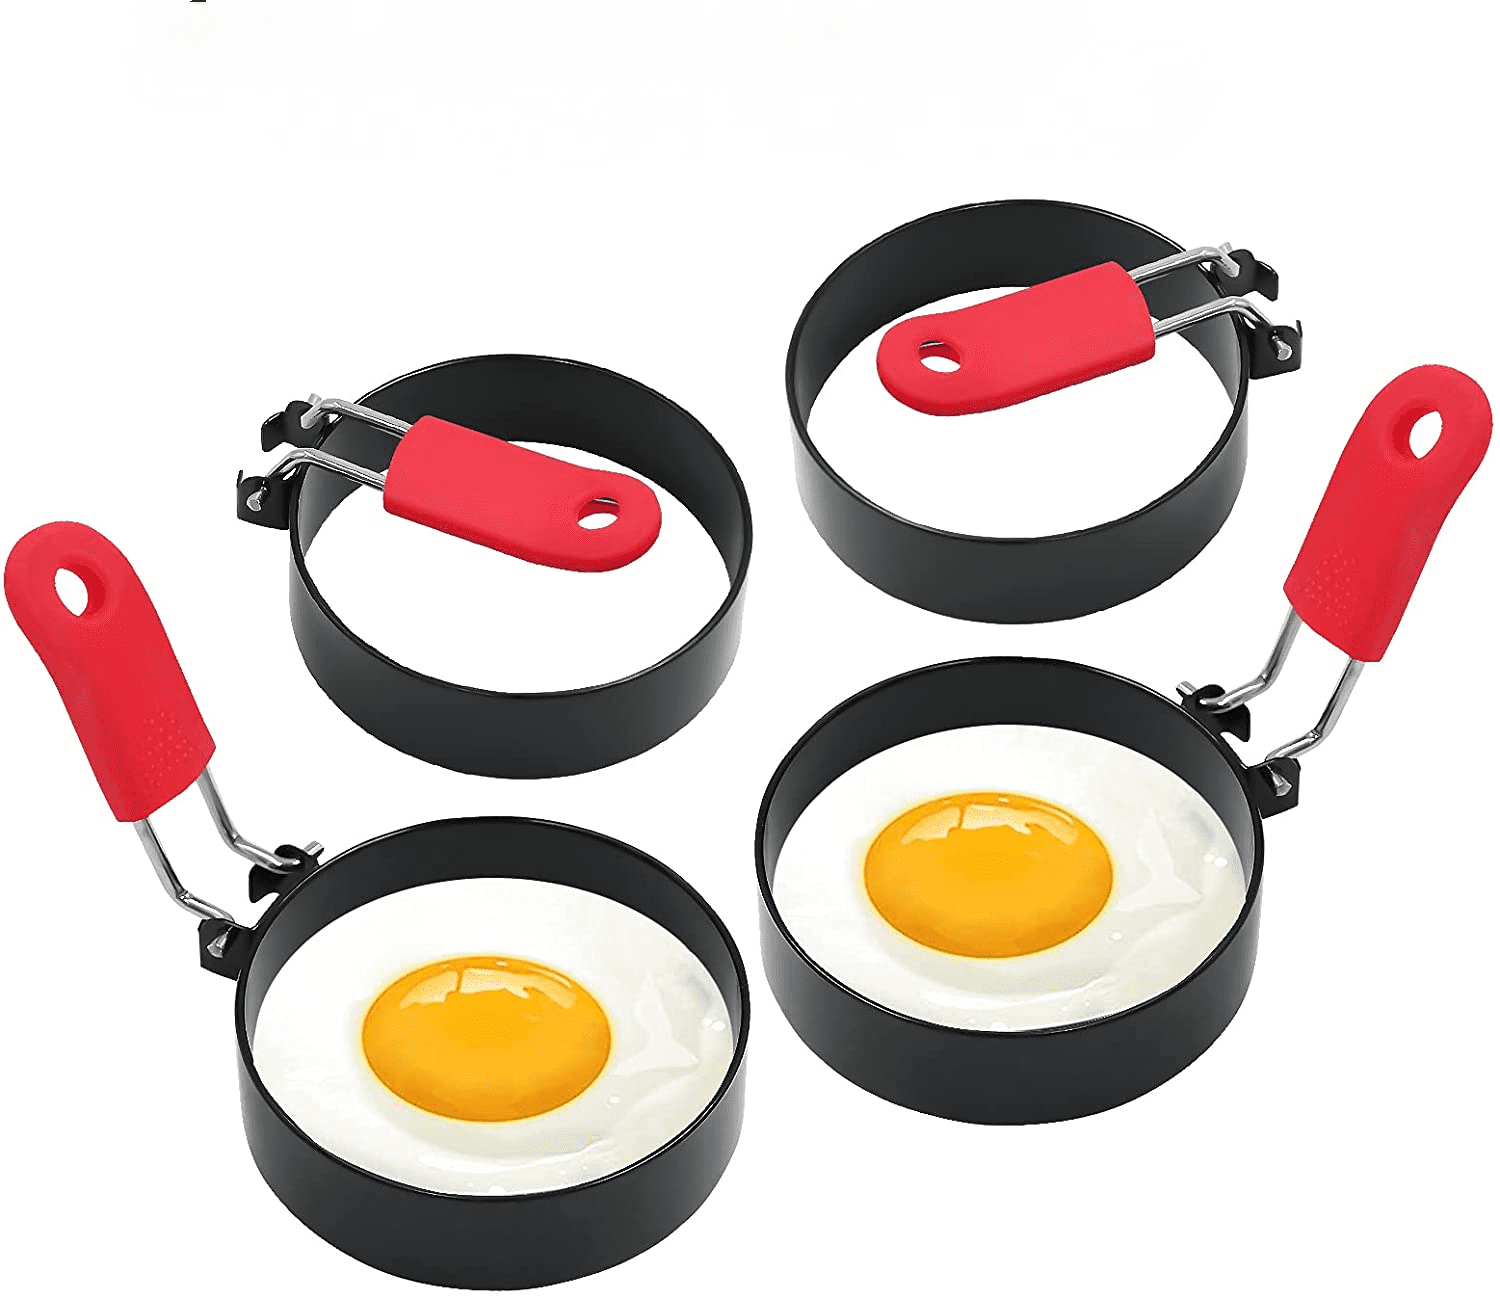 New 4 Pack Round Silicone Egg Poaching Rings w/ Handles Nonstick Cooking Kitchen 